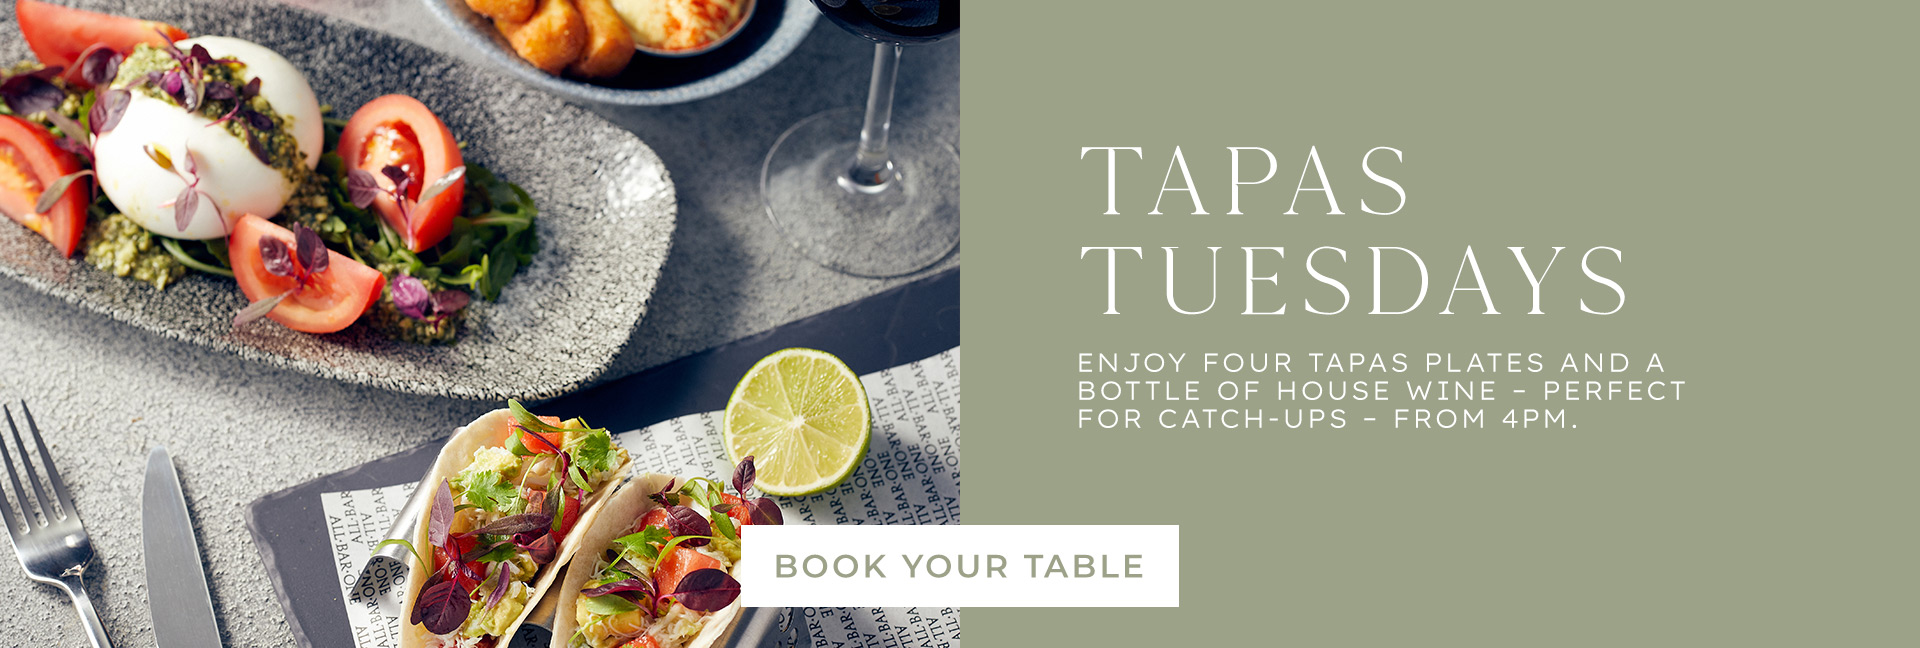 Tapas Tuesday at All Bar One Newhall Street Birmingham - Book now